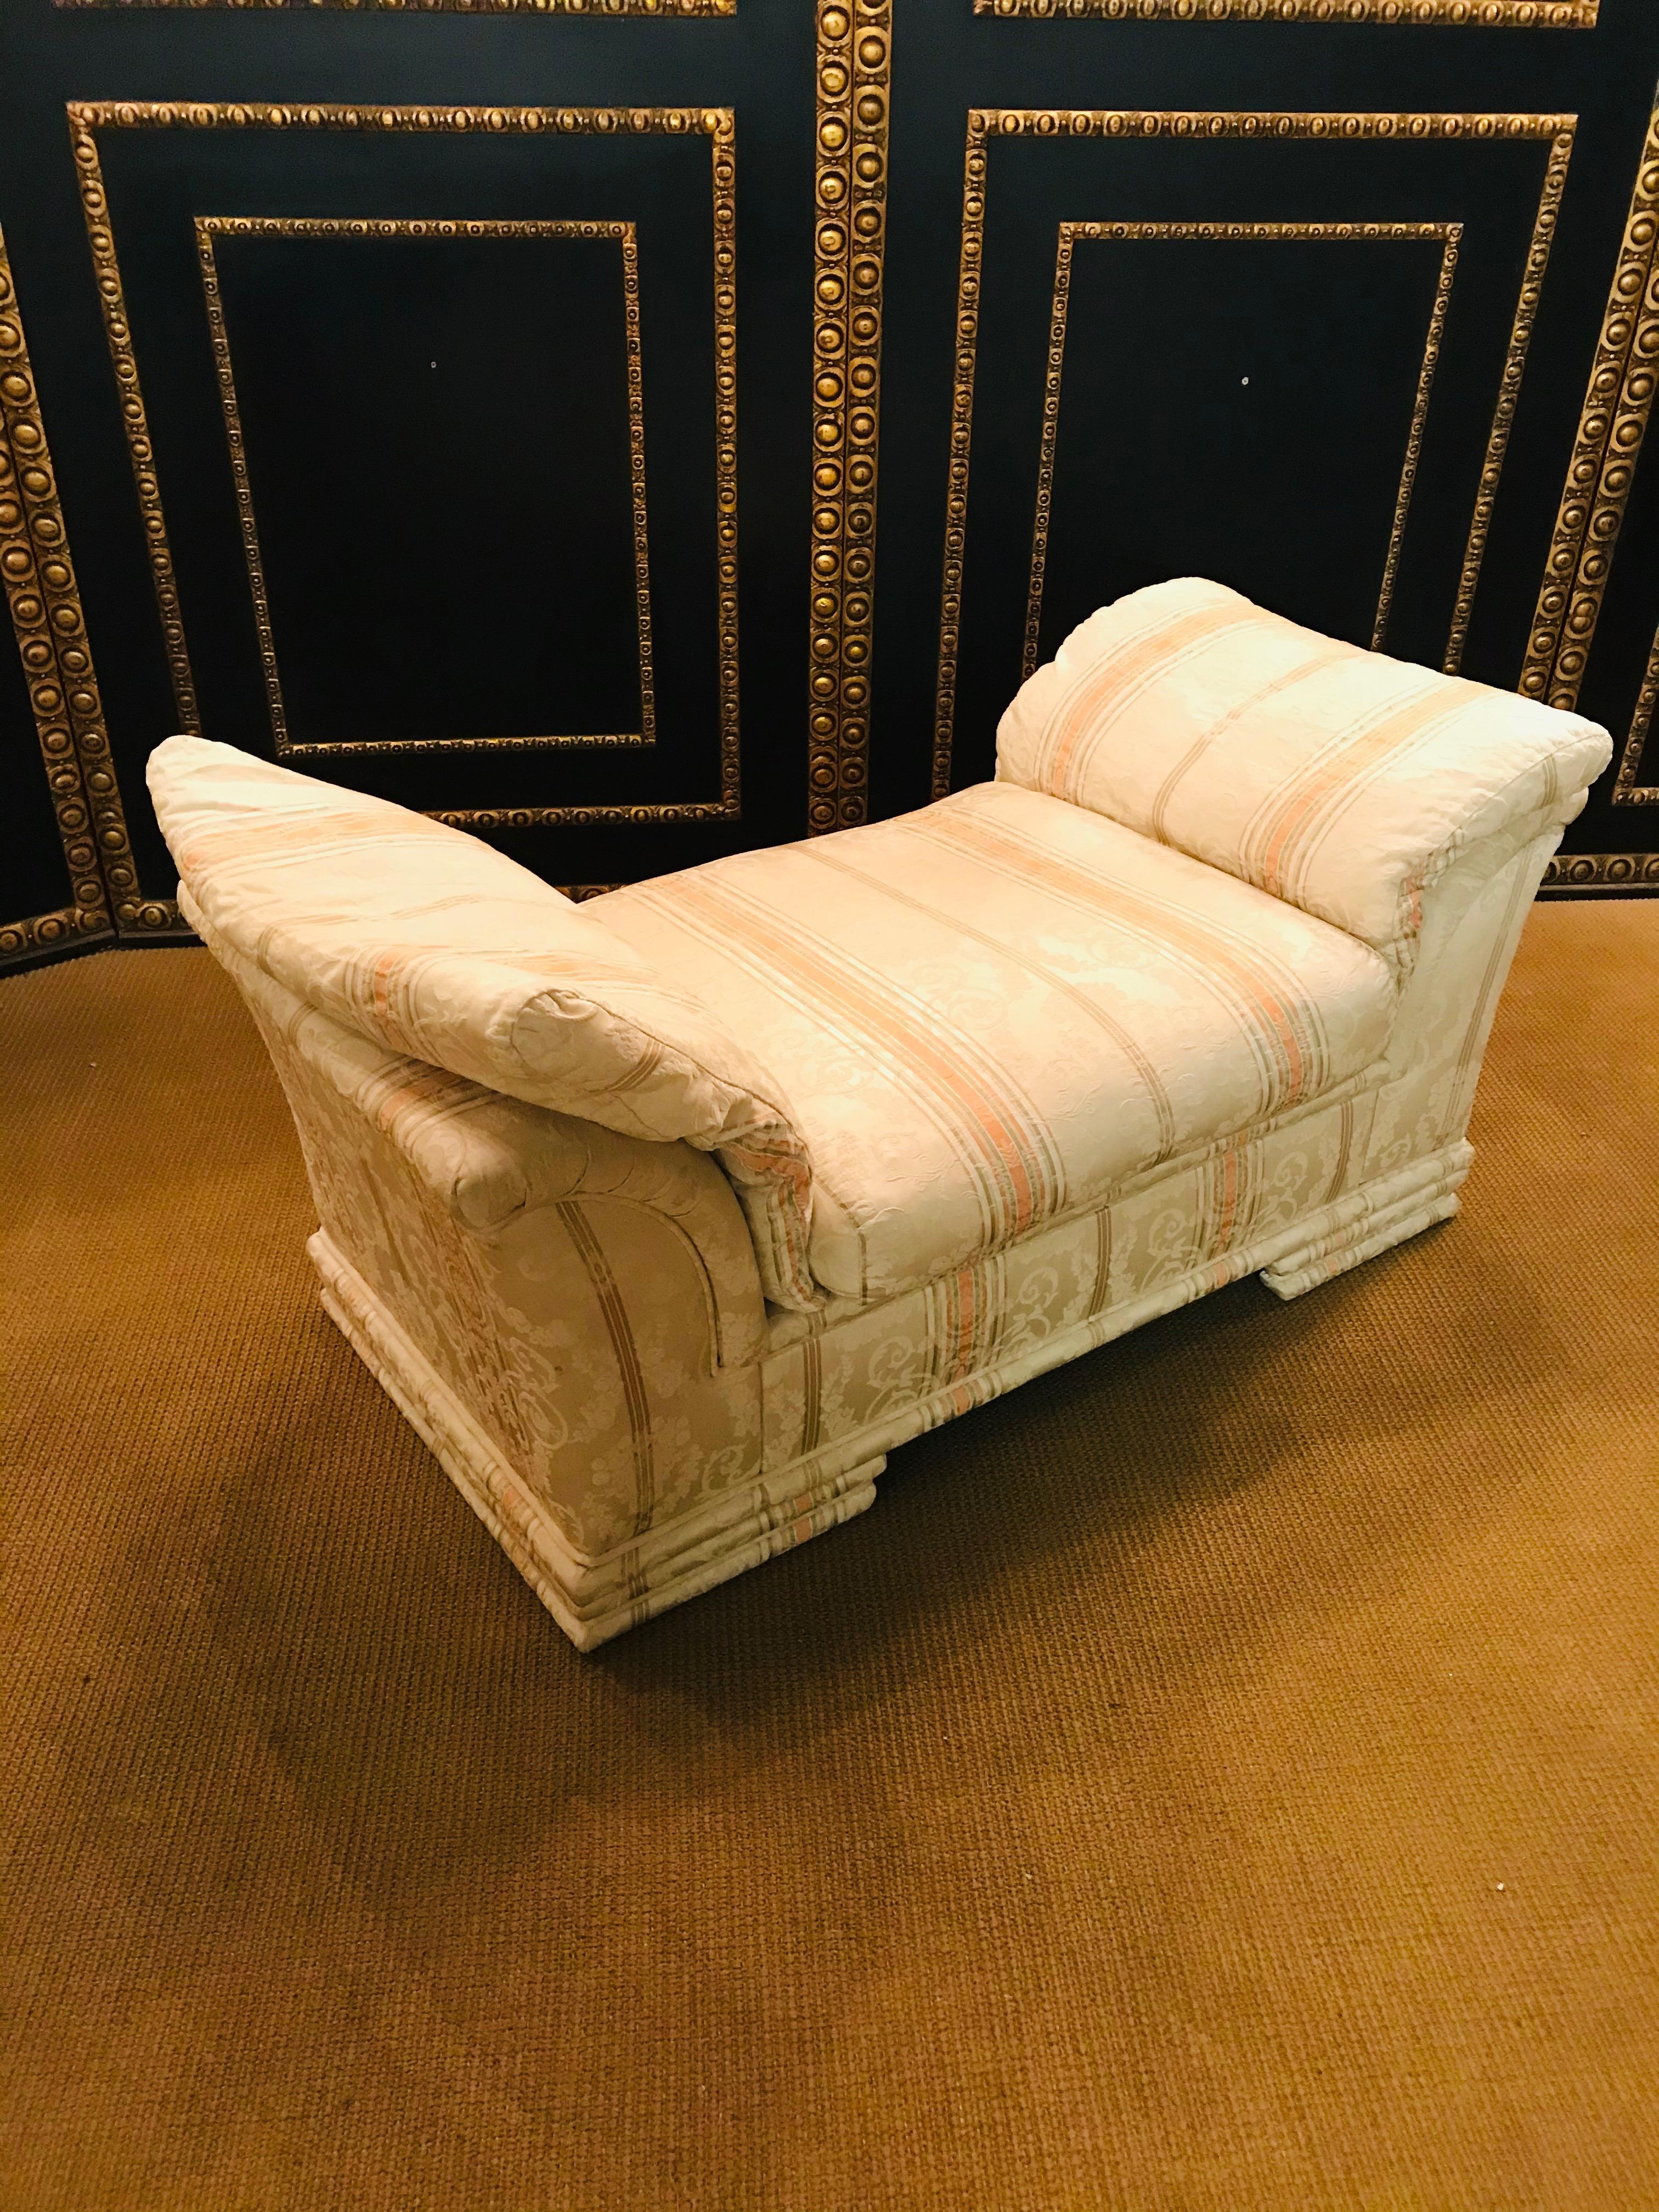 Very High-Quality Couch Set from the Bielefeld Workshops with Baroque Patterns 13